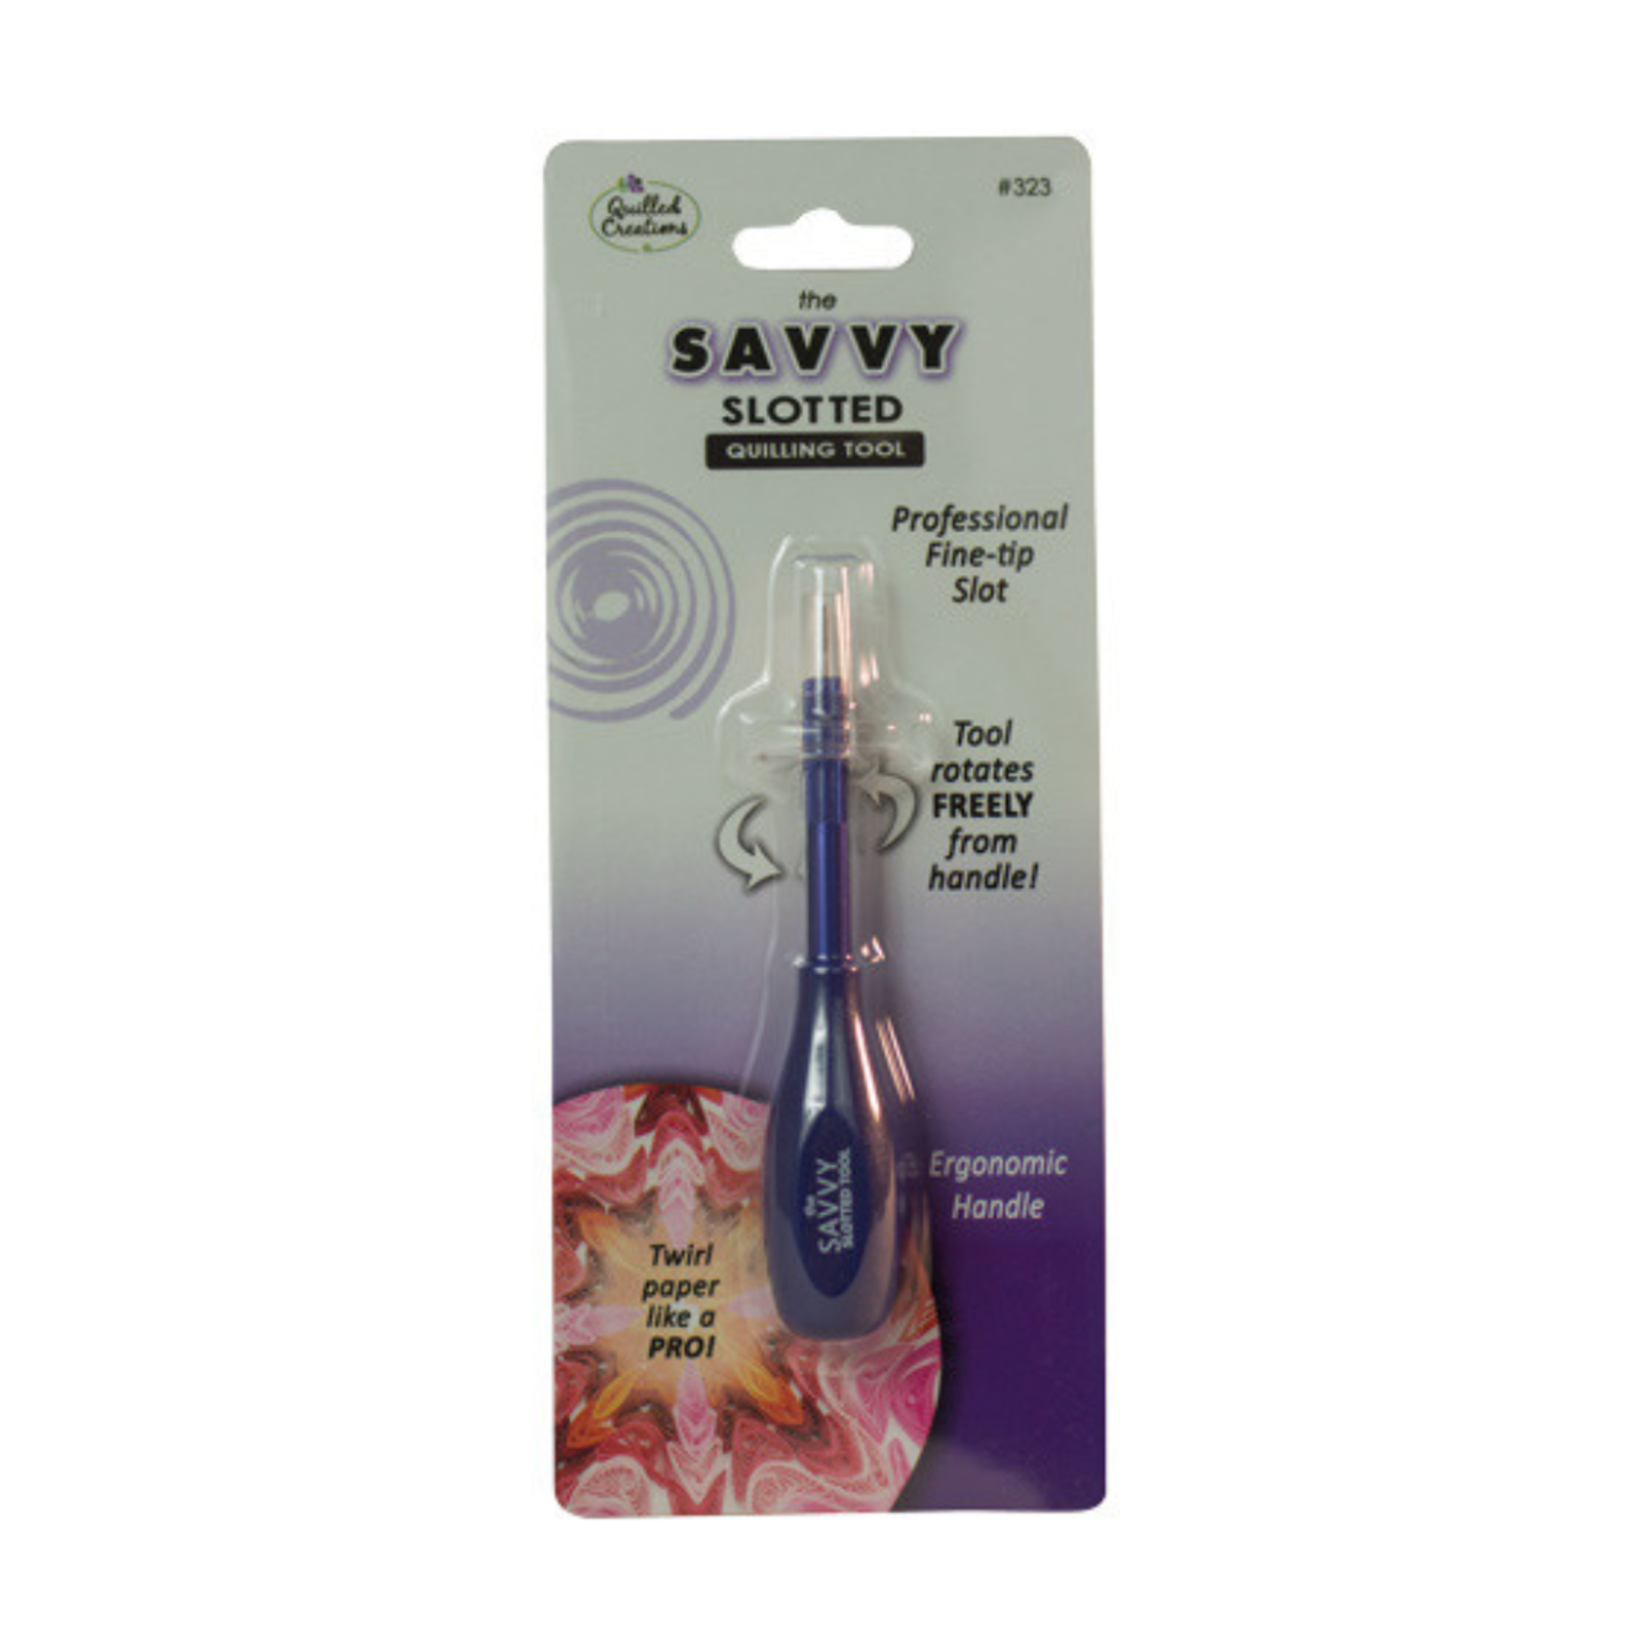 QUILLED CREATIONS THE SAVVY SLOTTED QUILLING TOOL